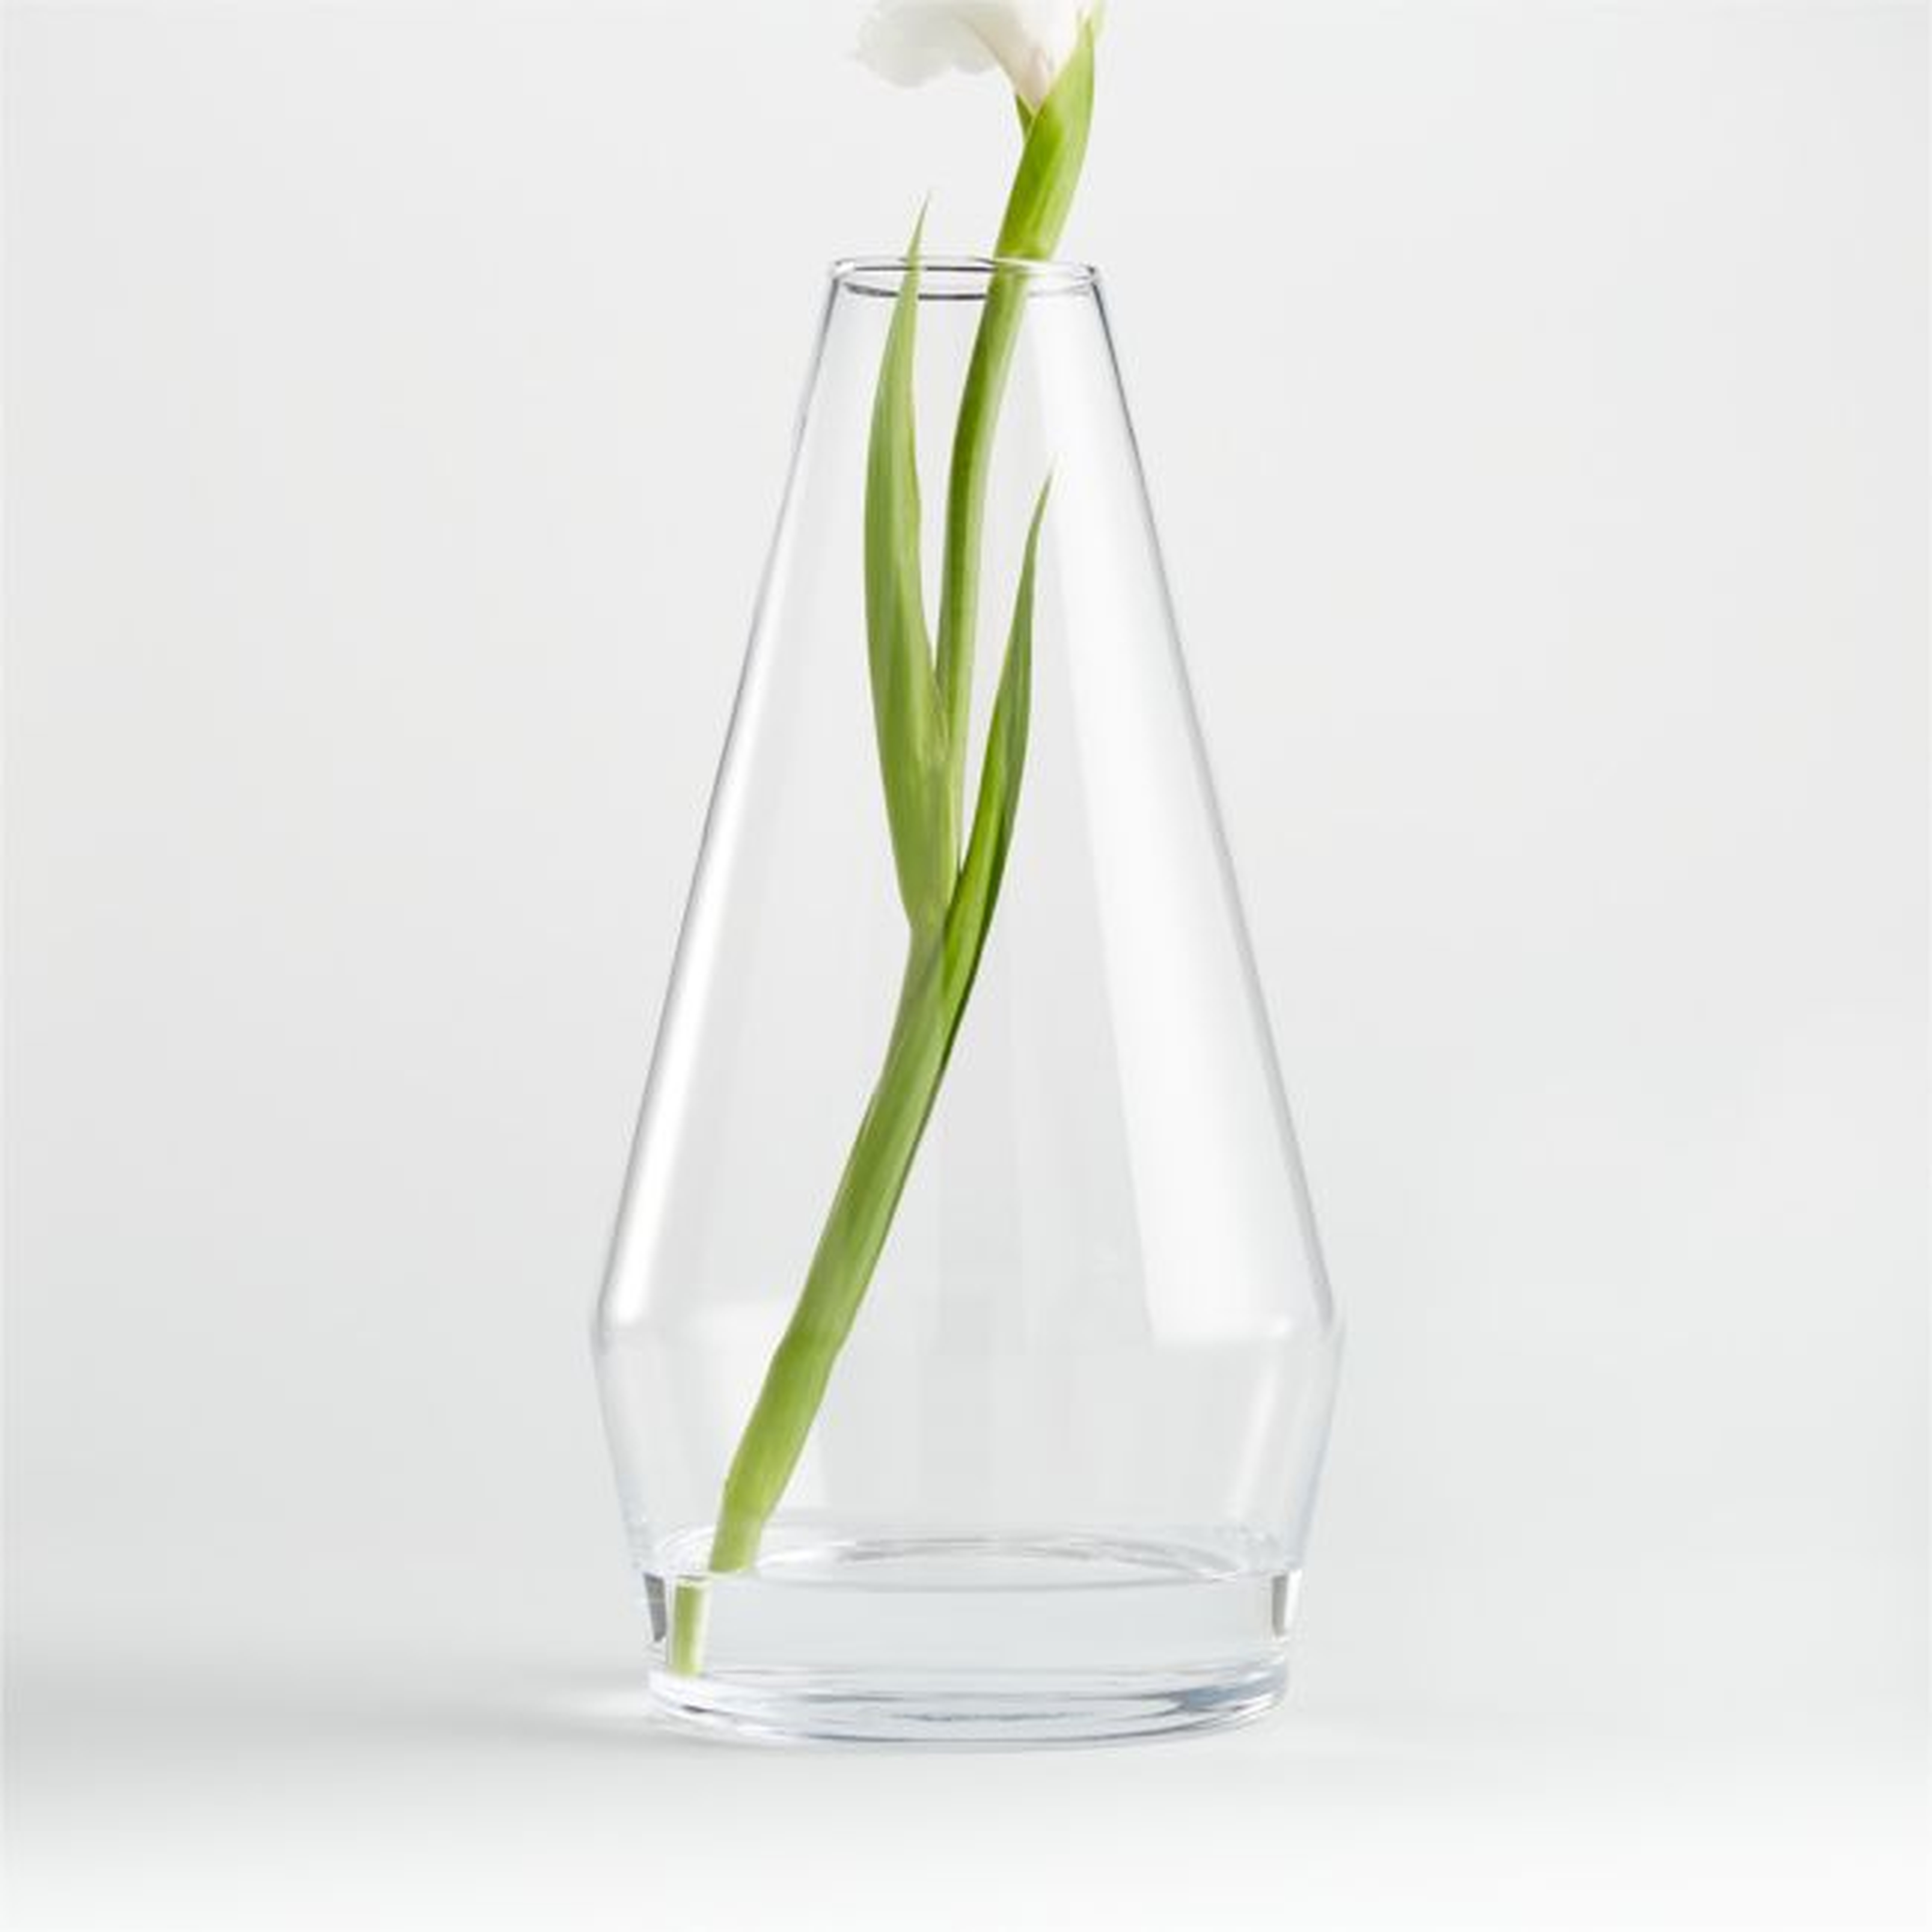 Laurel Angled Clear Glass Vase 13.5" - Crate and Barrel